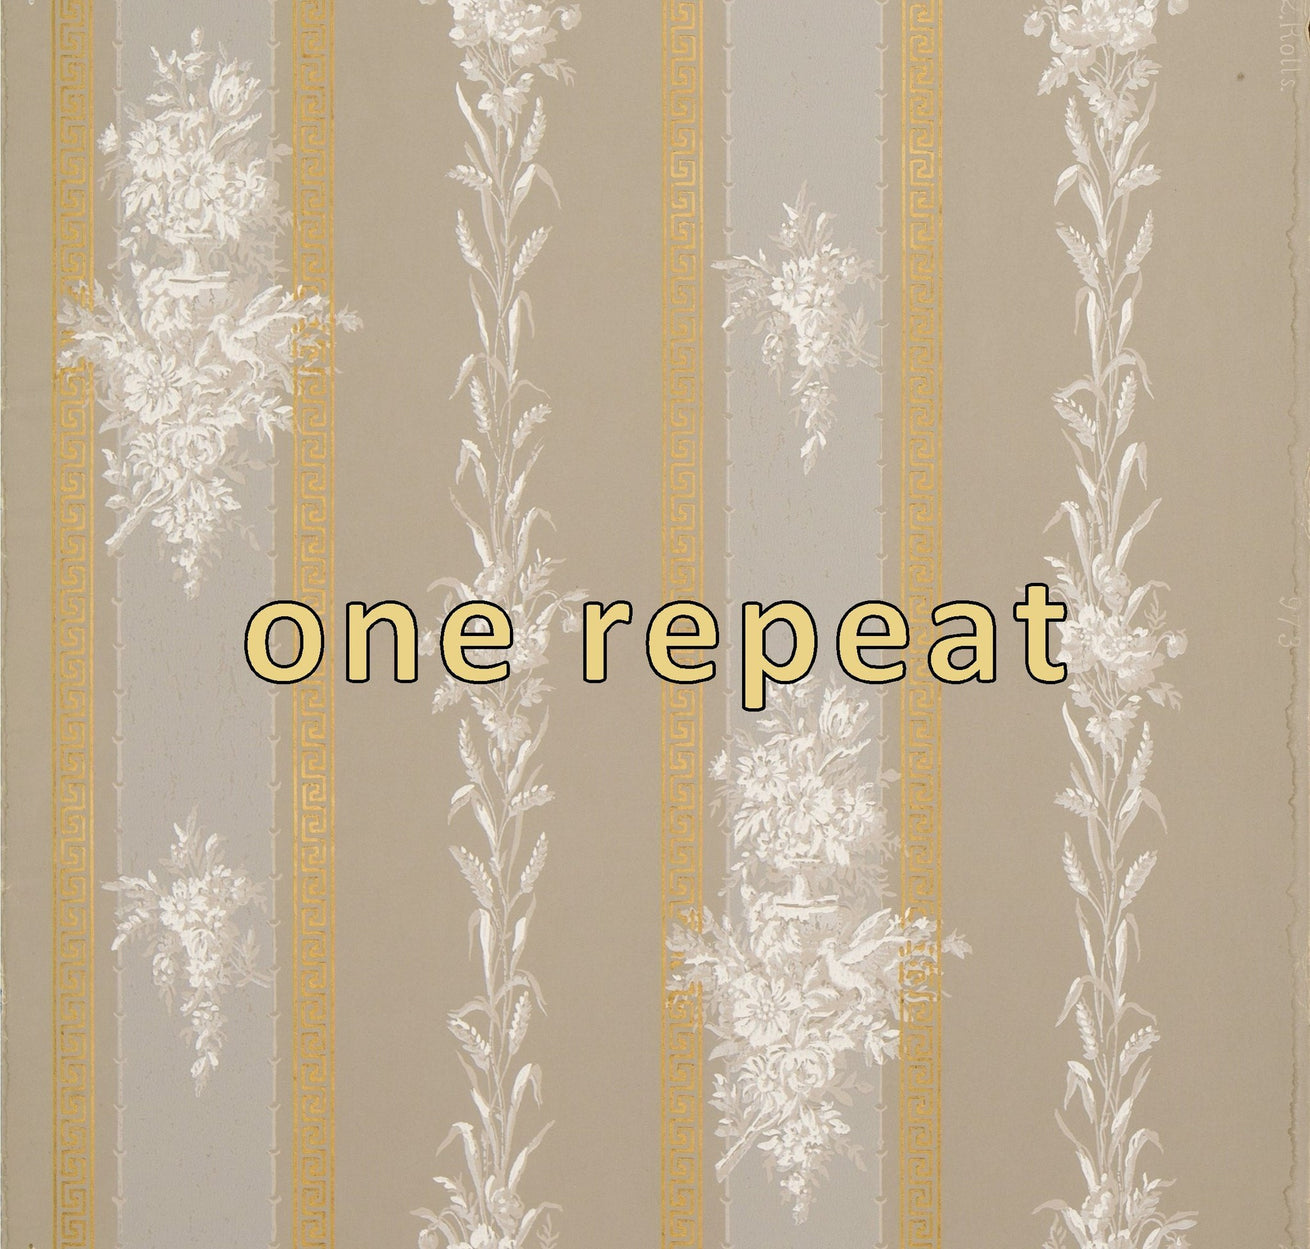 Flowers and Wheat Stems on Gilt Stripes - Antique Wallpaper Remnant